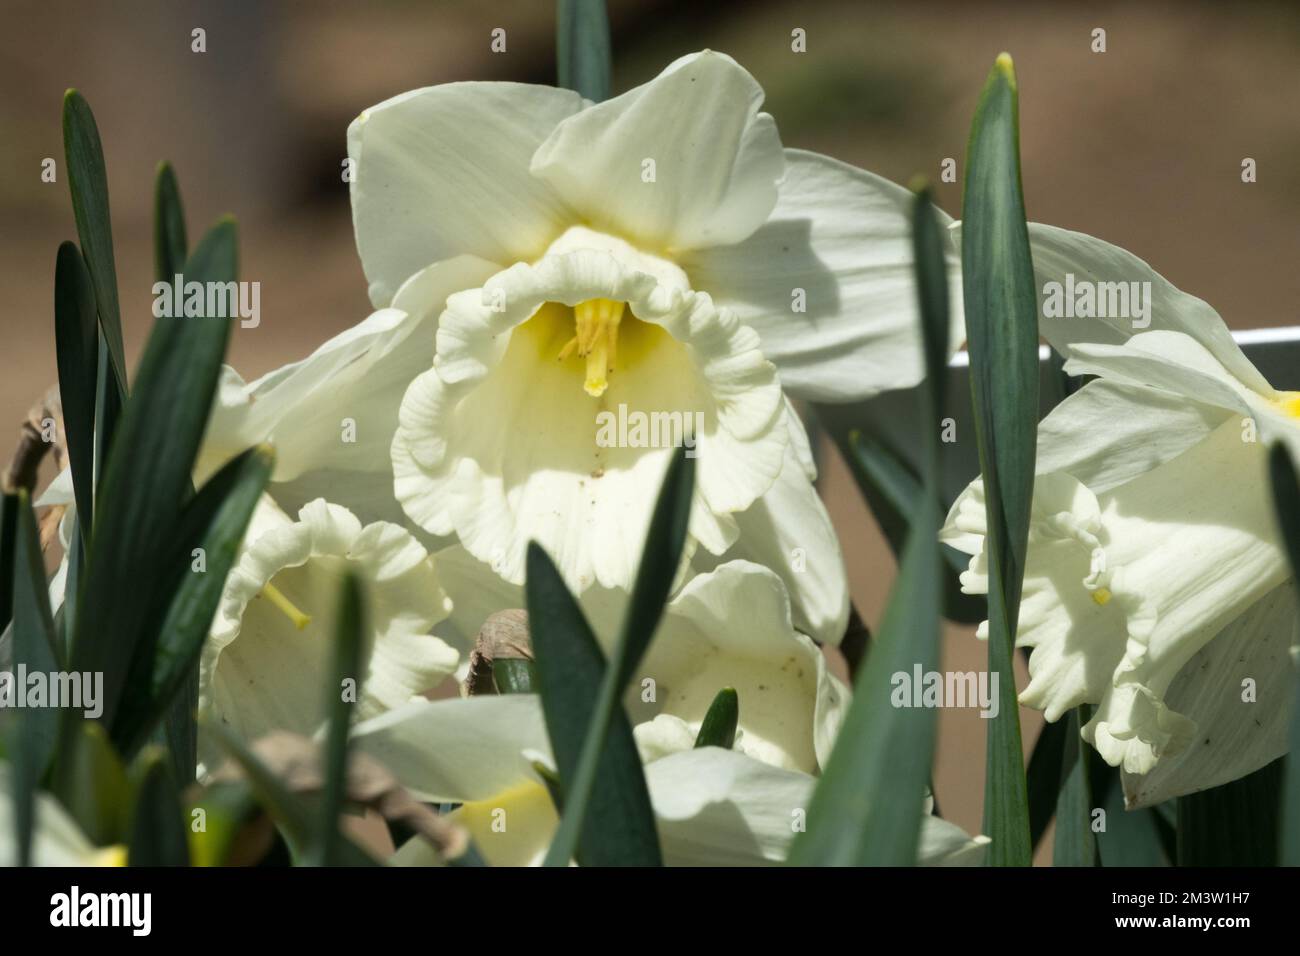 White, Daffodil, Narcissus, Flower, Spring, Season, Trumpet Daffodil, Flowering, Daffodils, Long-lived, Bulbous, Plant, Narcissus "Mount Hood" Stock Photo